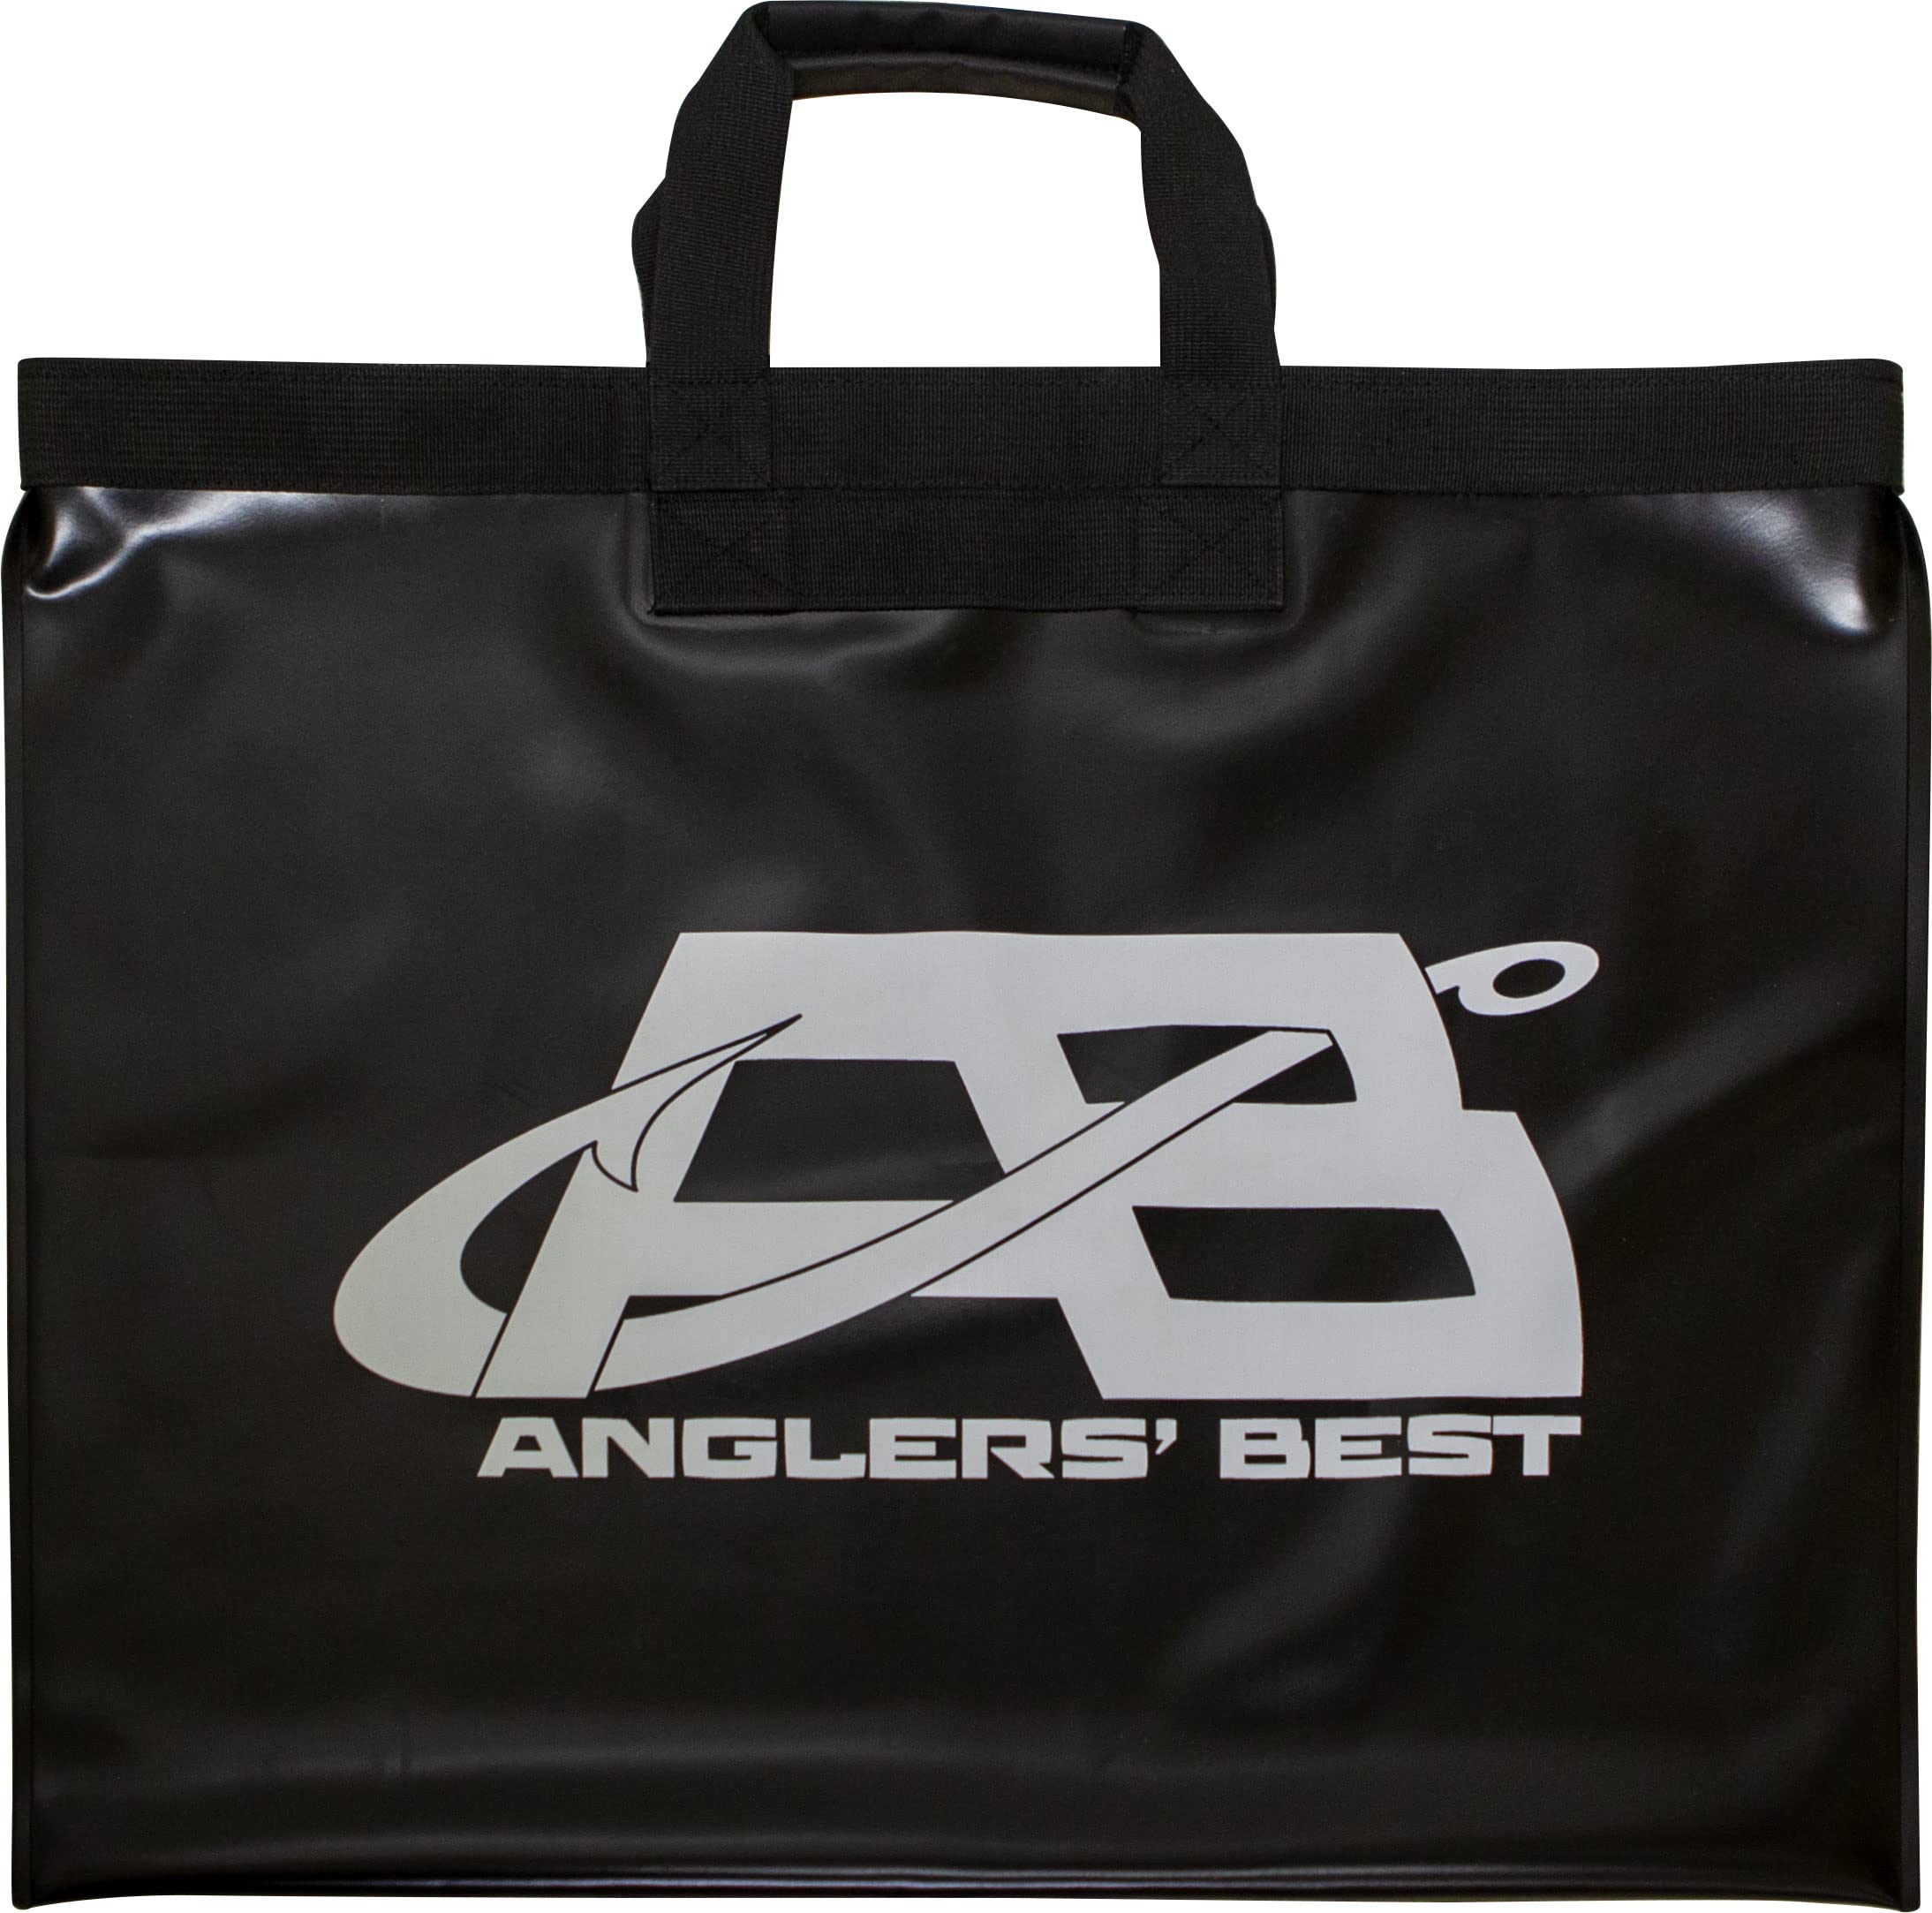 Angler's Best Leak Proof and Puncture Resistant Fishing Tournament